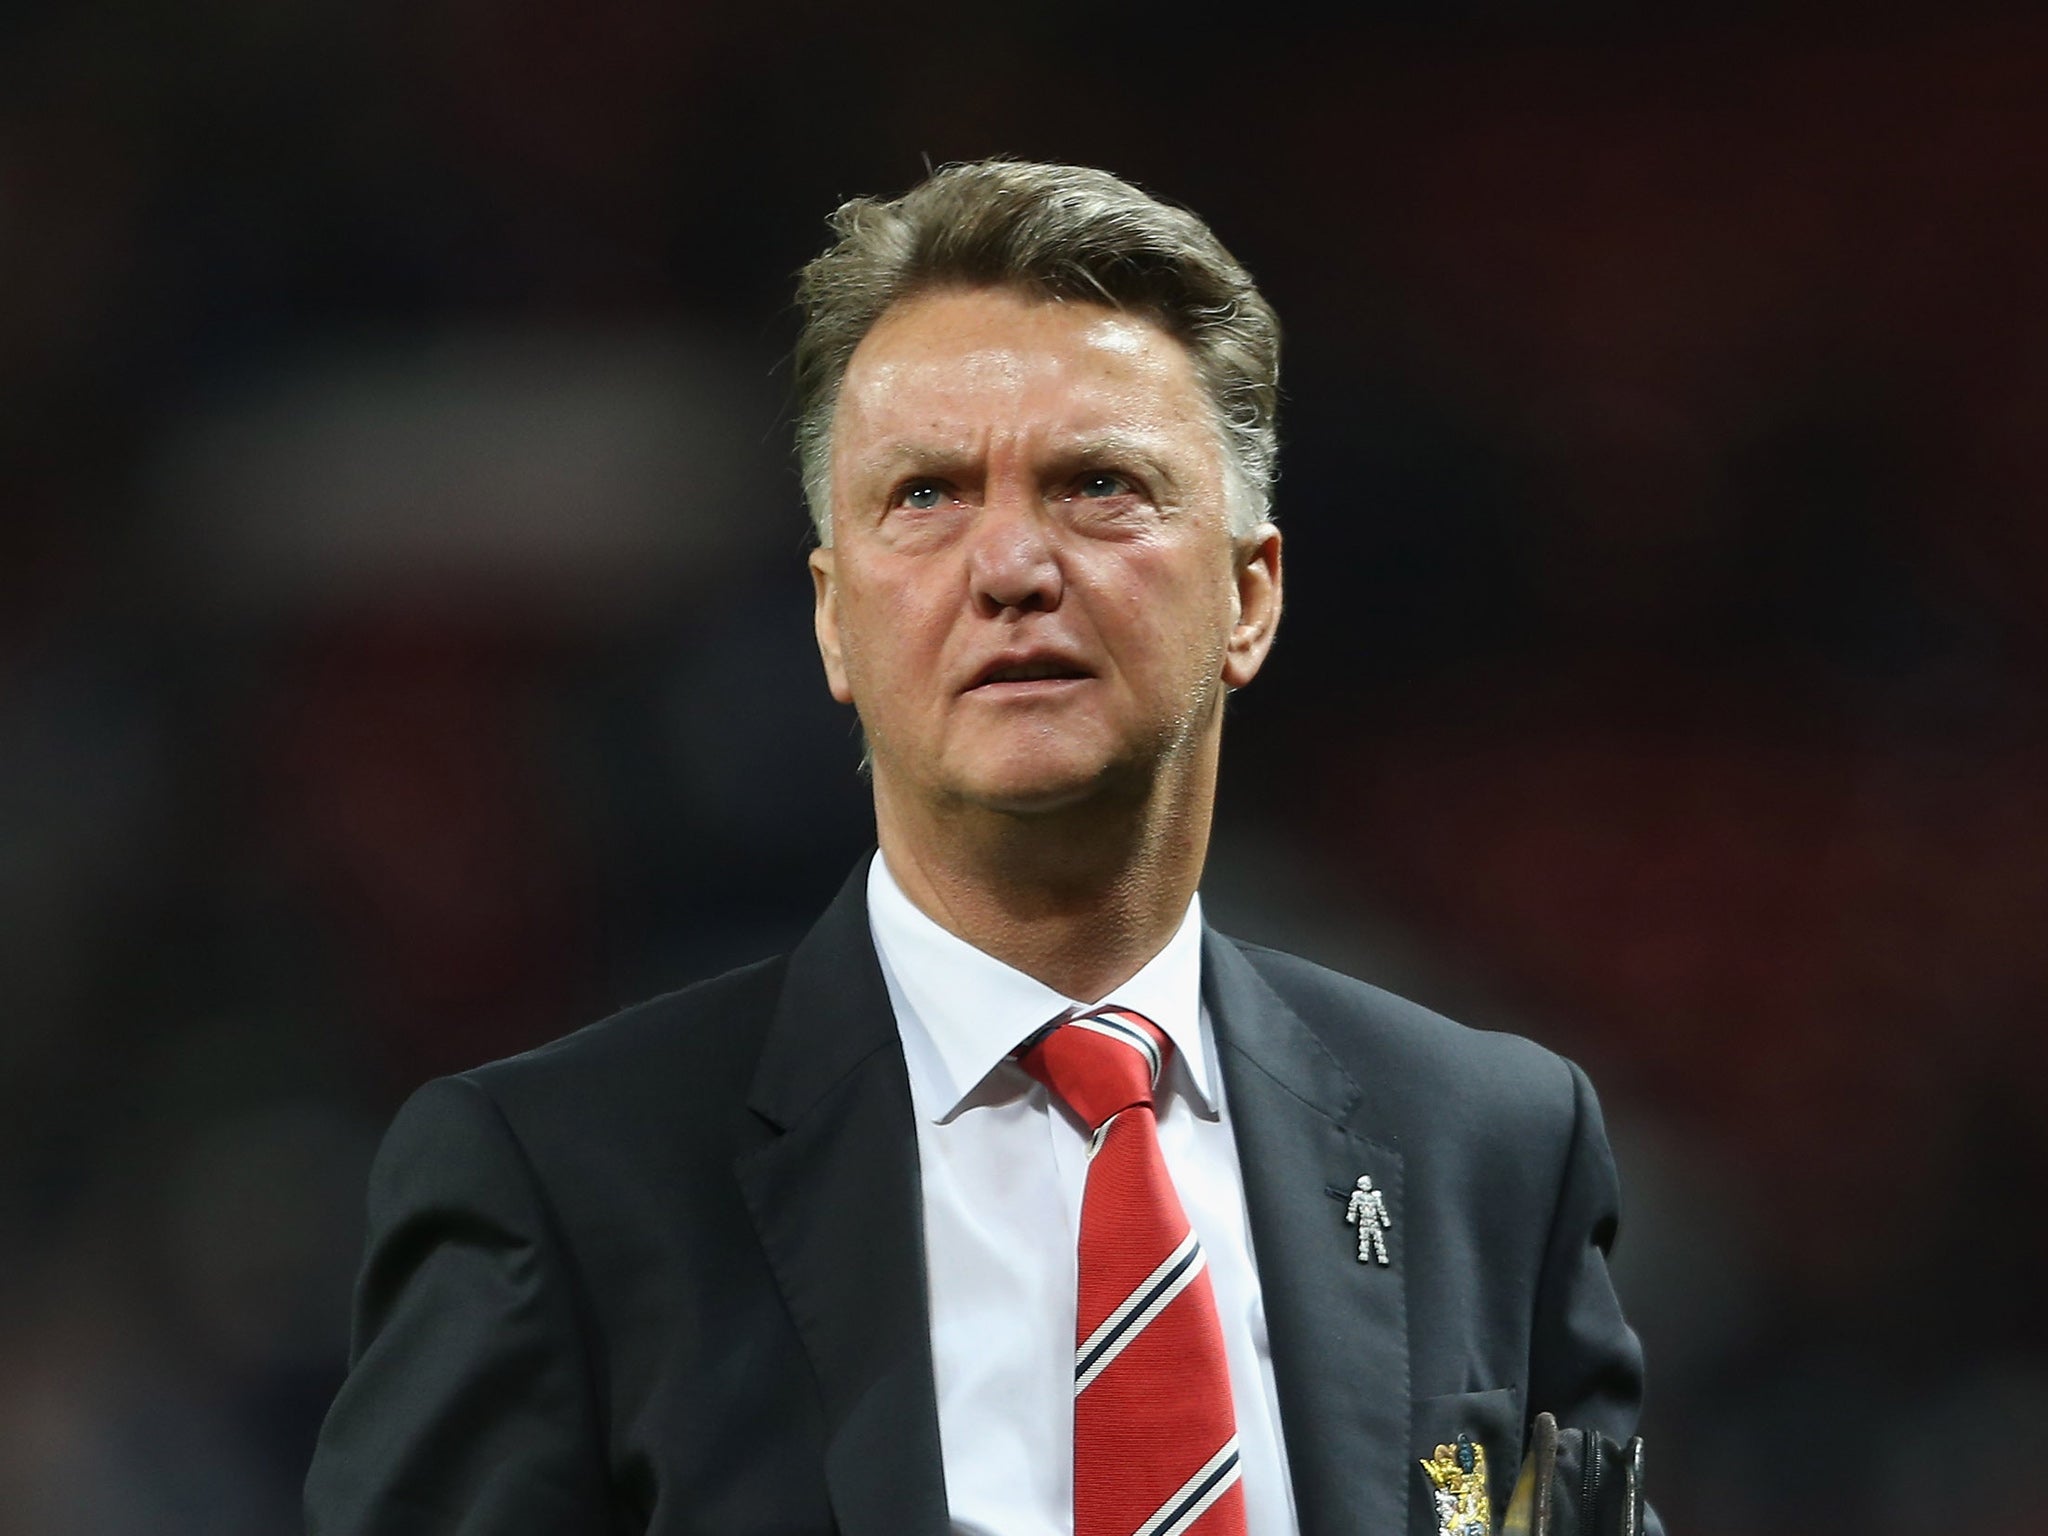 Louis van Gaal looks on from the side of the pitch